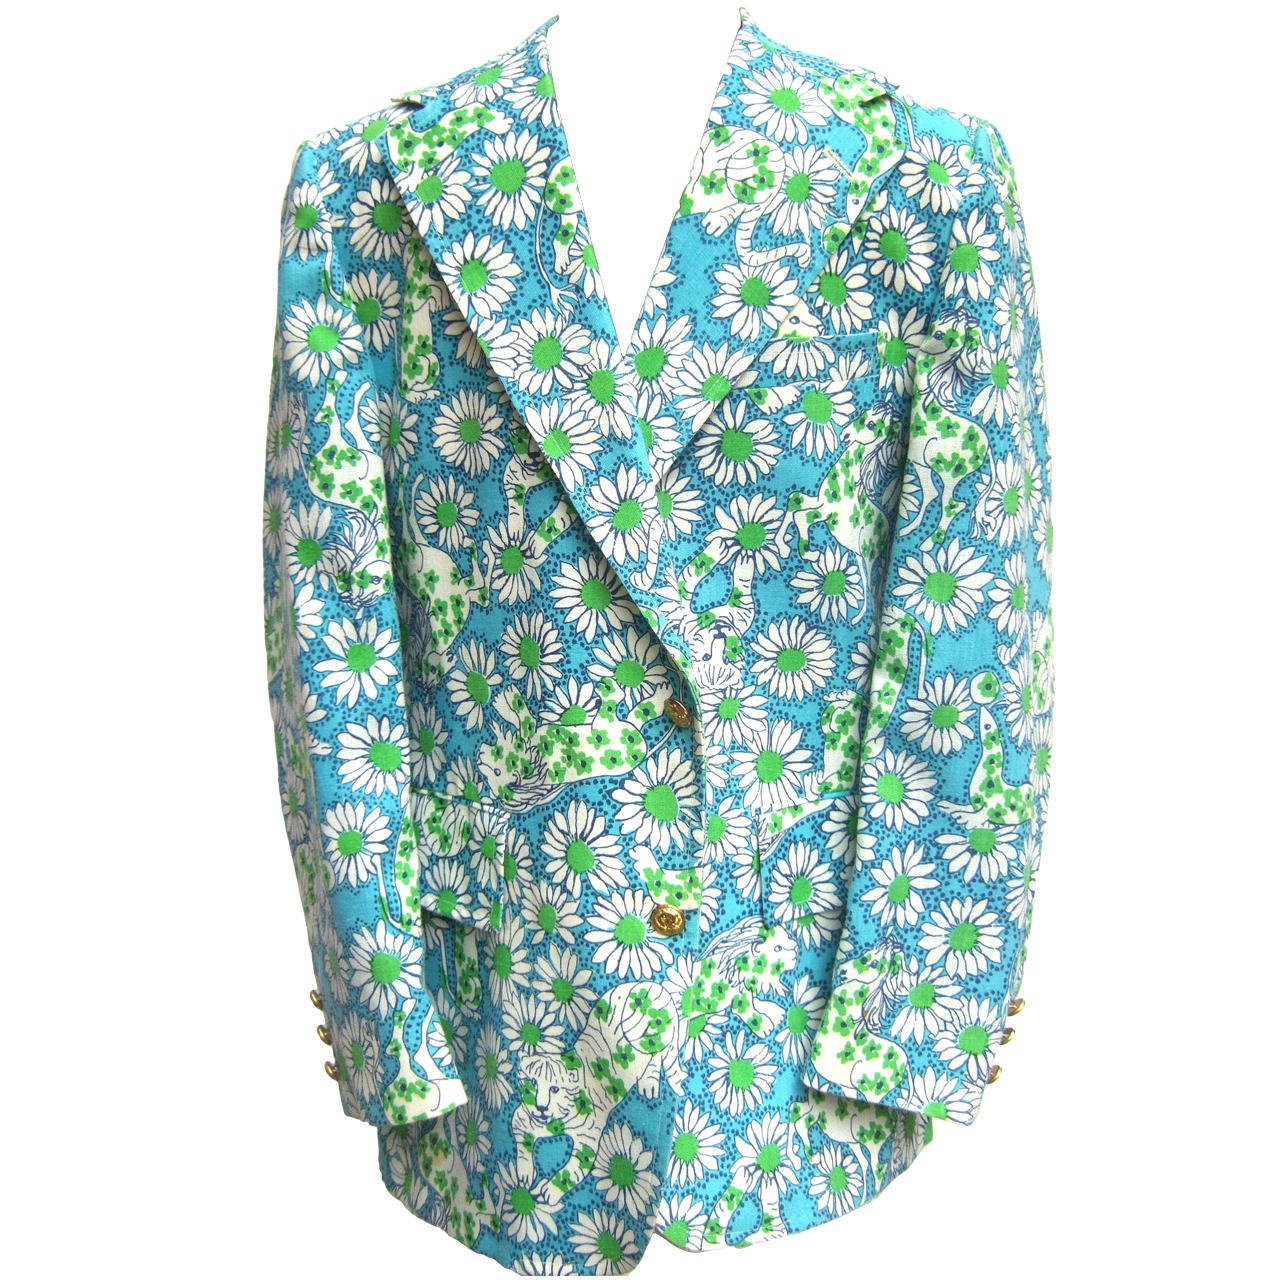 Lilly Pulitzer Men's Whimsical Jungle Print Jacket c 1970s Size 41